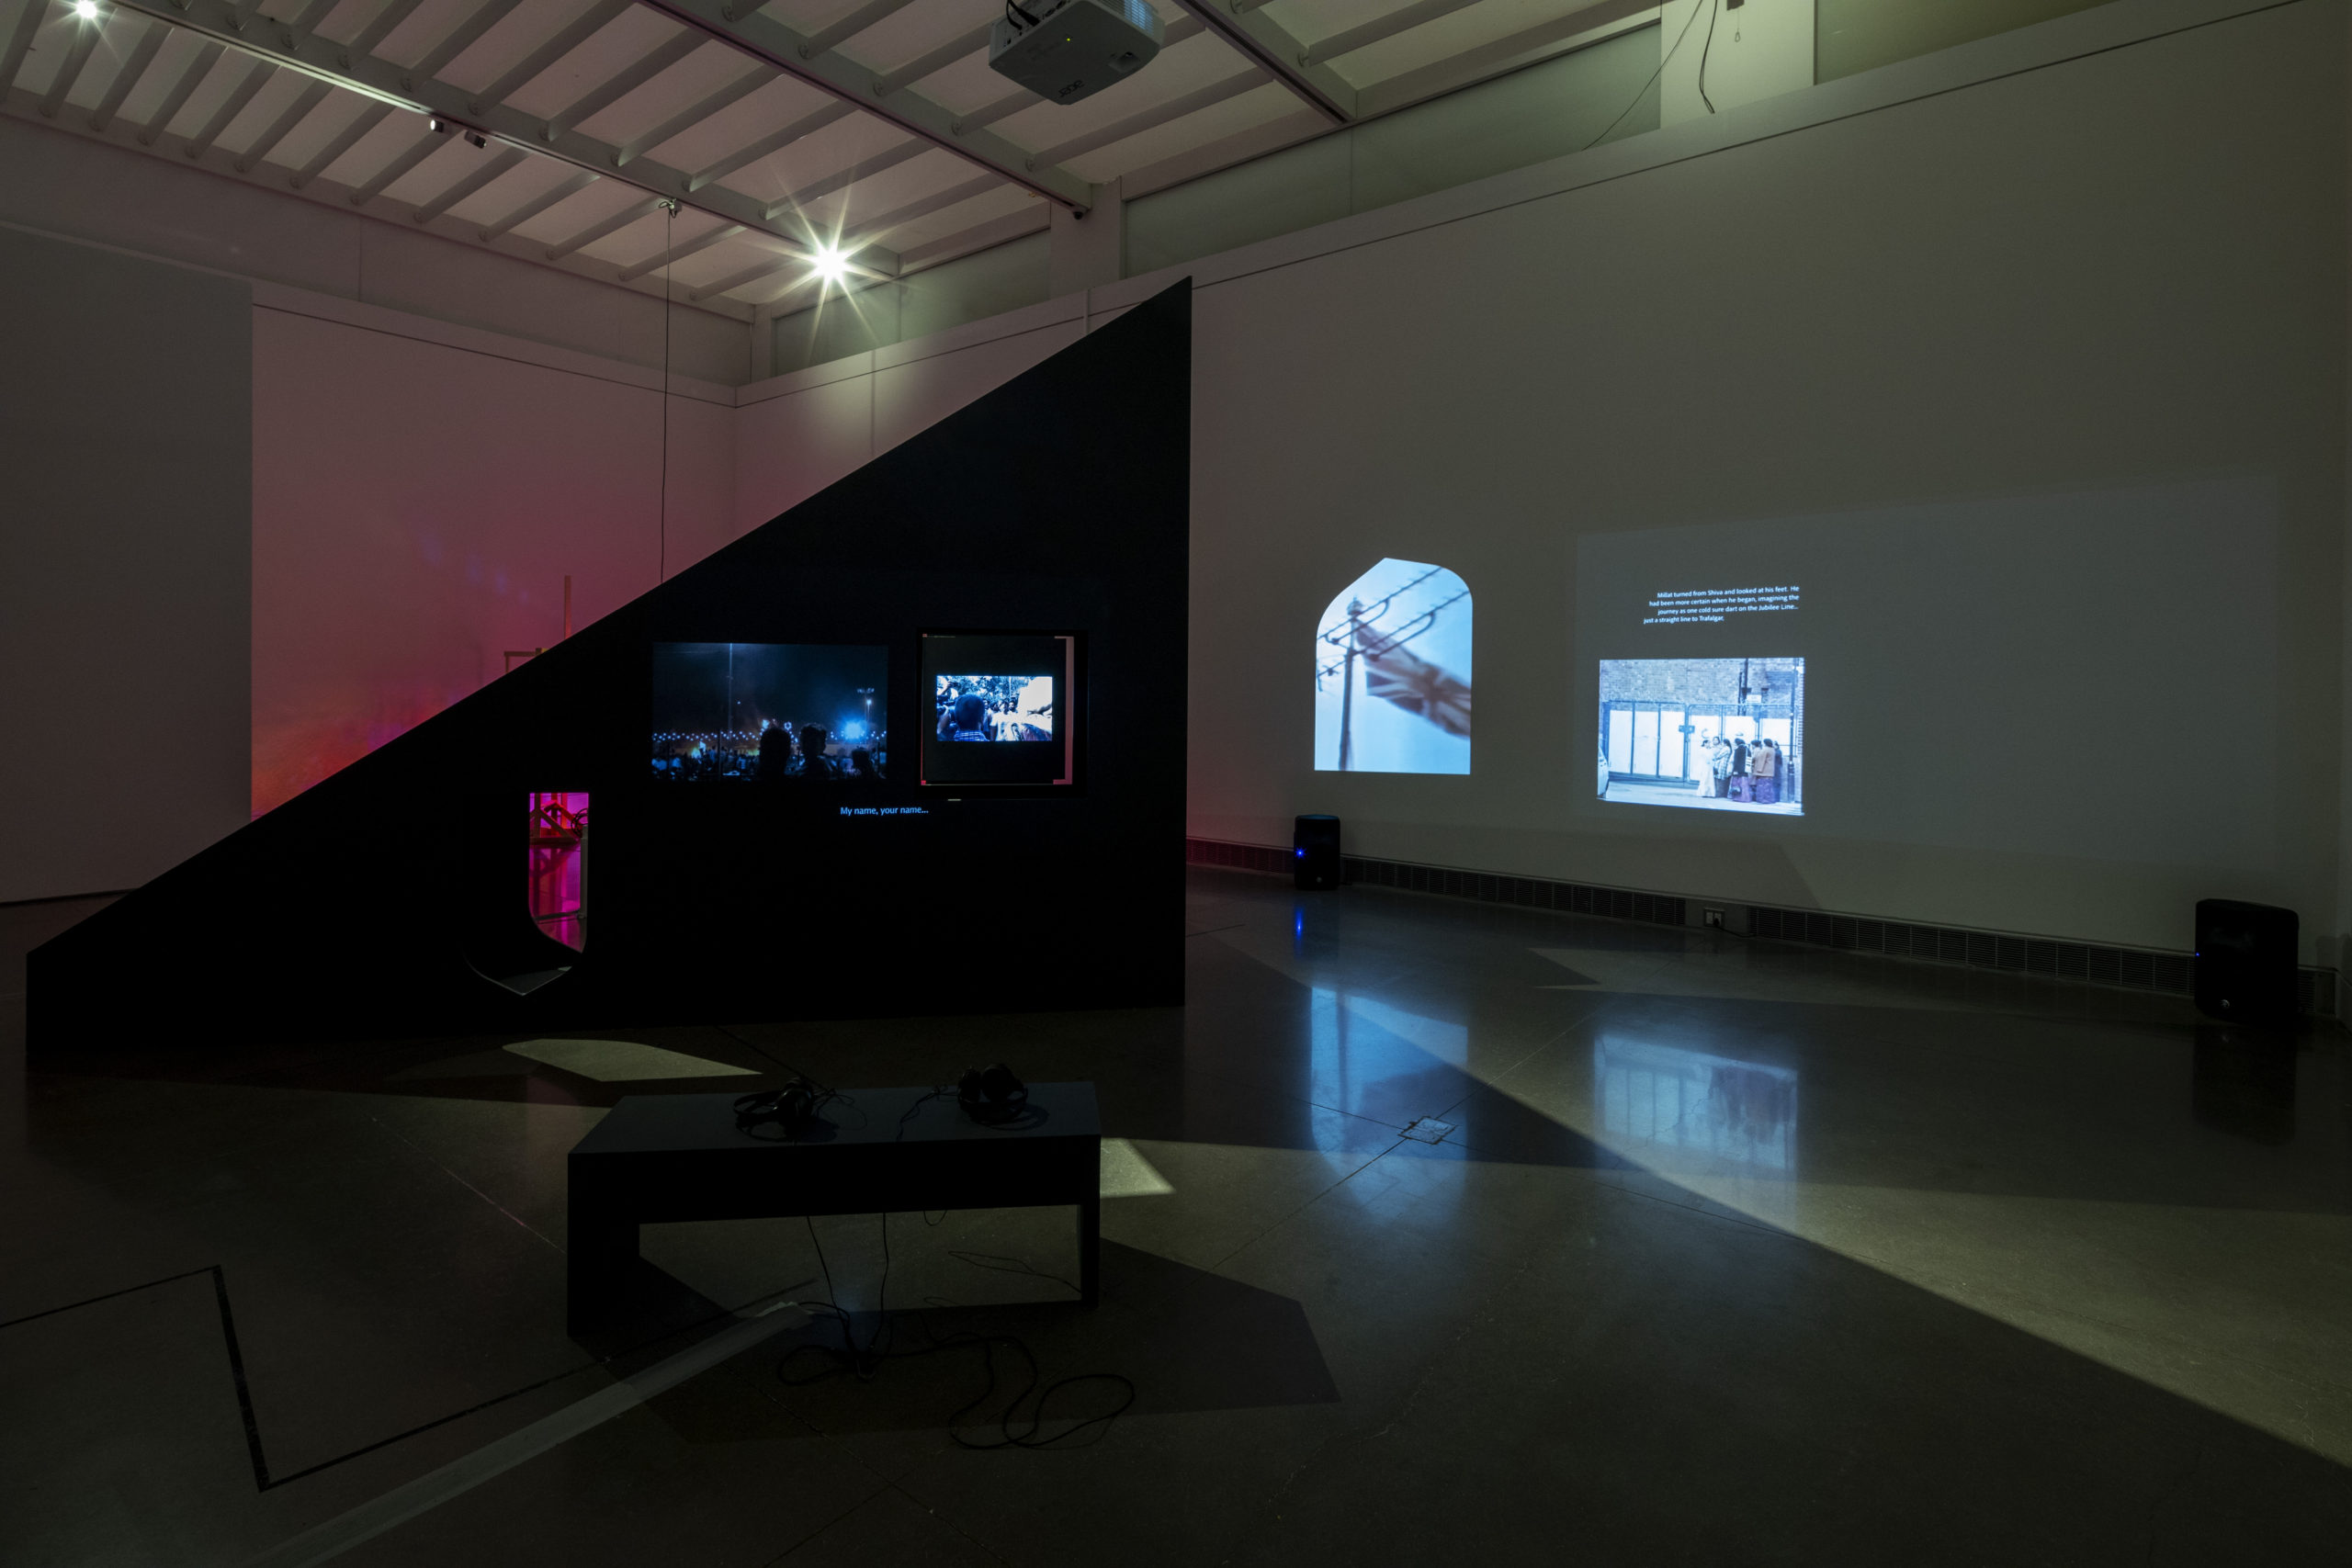 An exhibition room showcasing four video projections on its walls and on a large, black triangular structures. The structure is lit from a few angles and is casting shadows all across the floor.